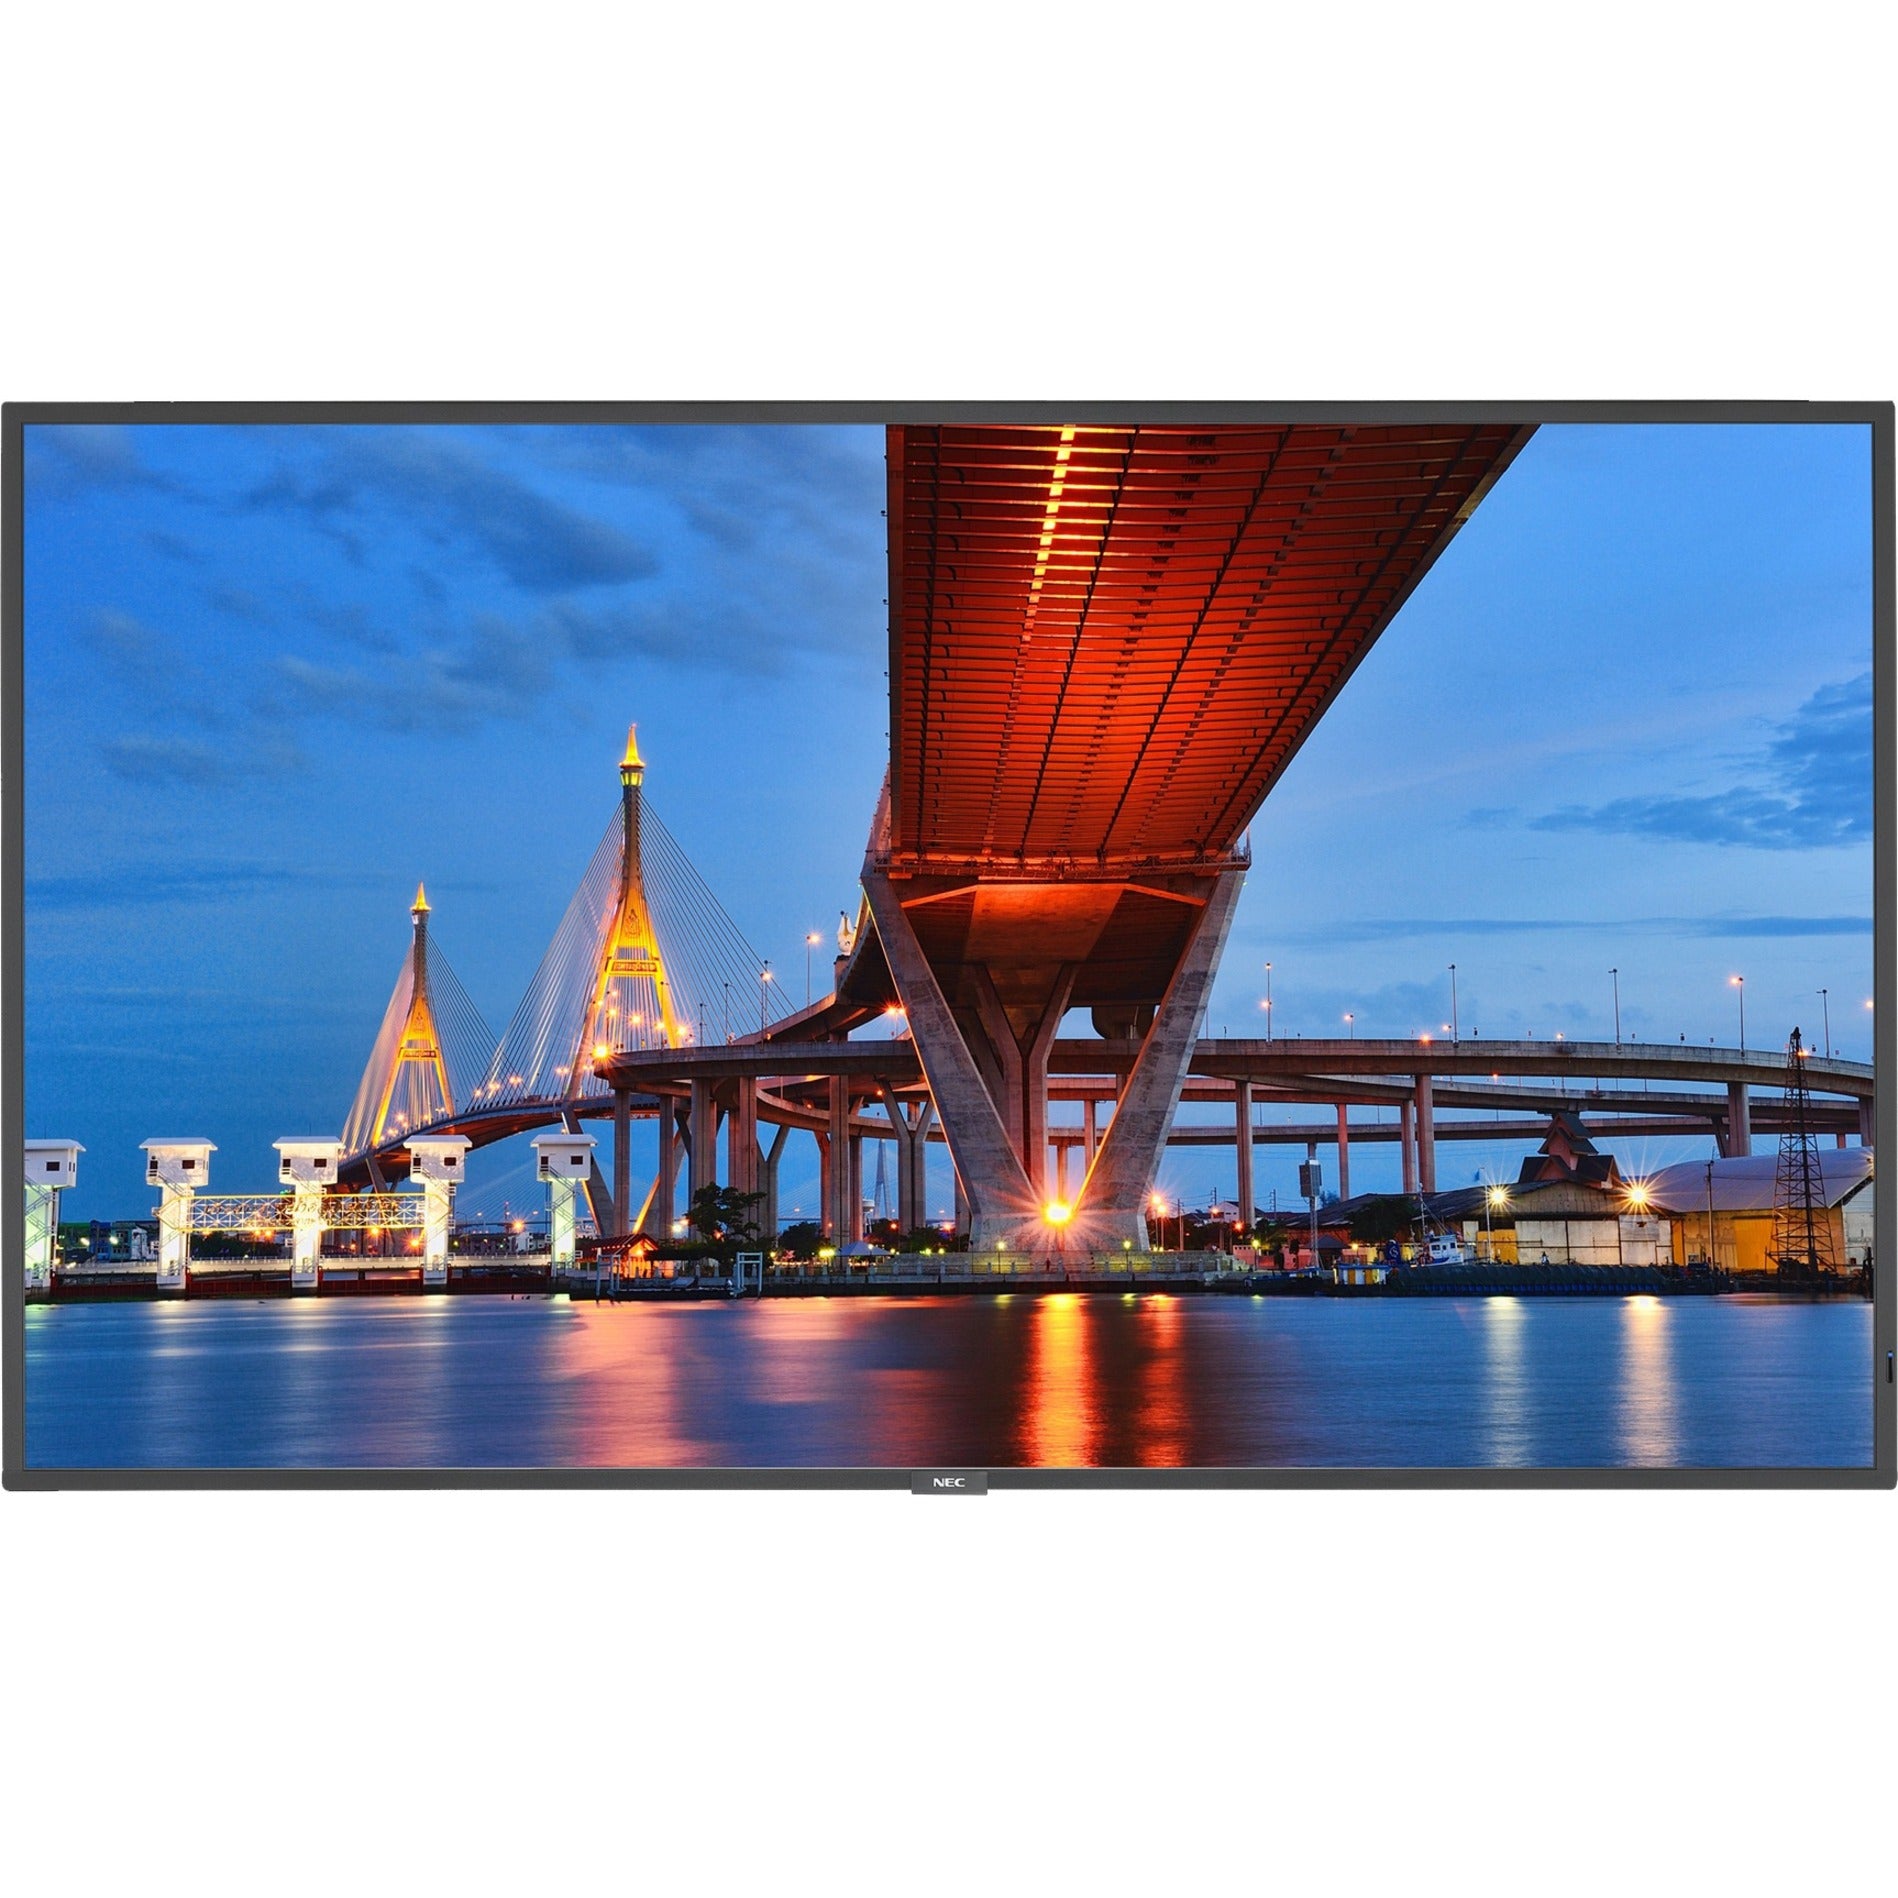 NEC Display ME651-AVT3 65" Ultra High Definition Commercial Display with Integrated ATSC/NTSC Tuner, 400 Nit, 8-bit+FRC, 2160p, 3 Year Warranty, Energy Star, HDMI x2, DP x1 [Discontinued]